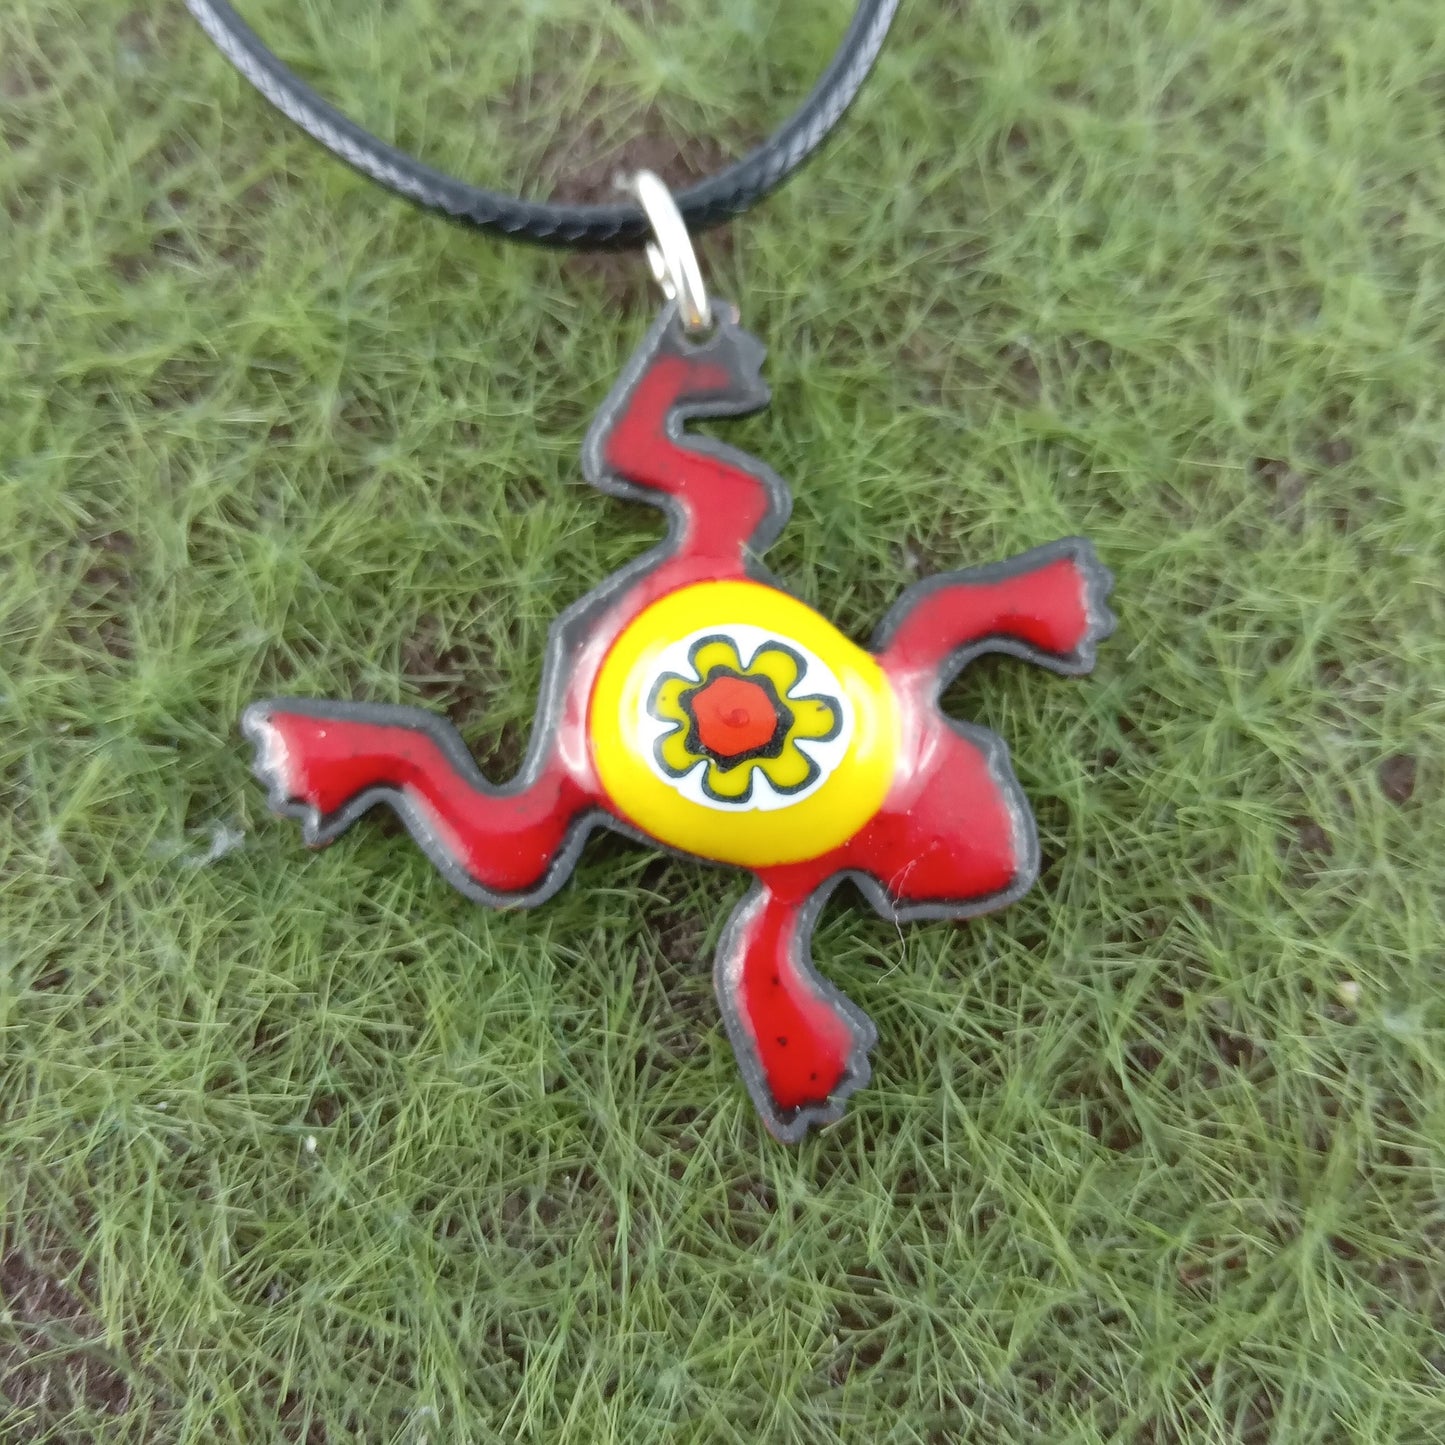 Pendant with enamel, frog pendant with chain